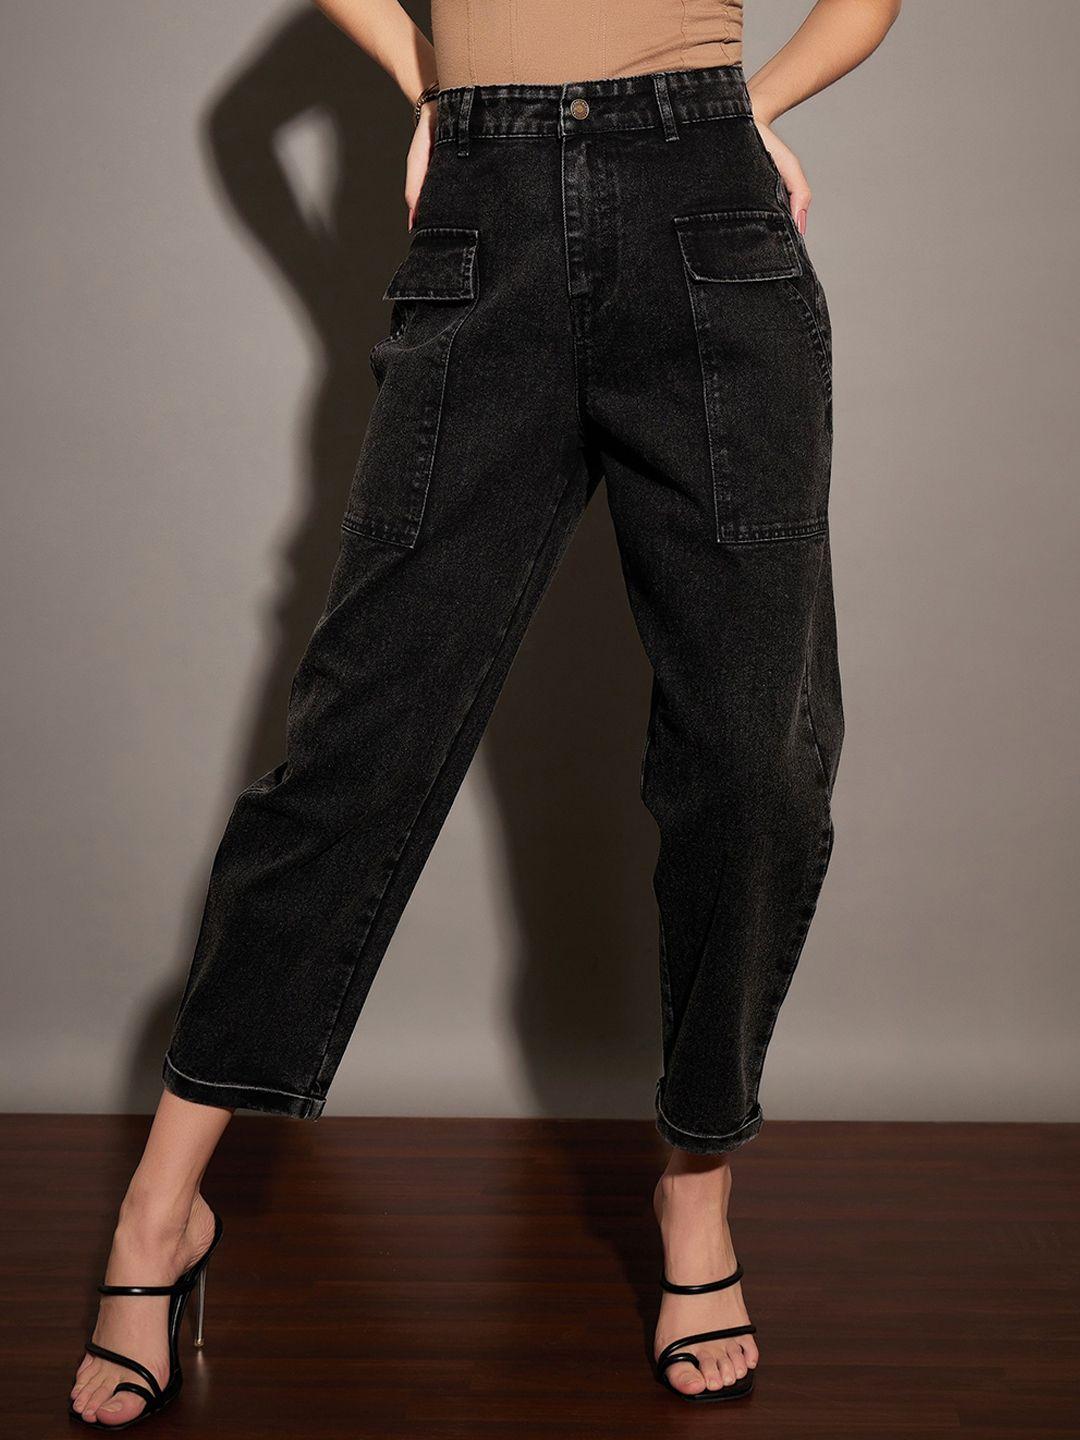 sassafras-black-high-rise-acid-wash-cropped-clean-look-stretchable-jeans